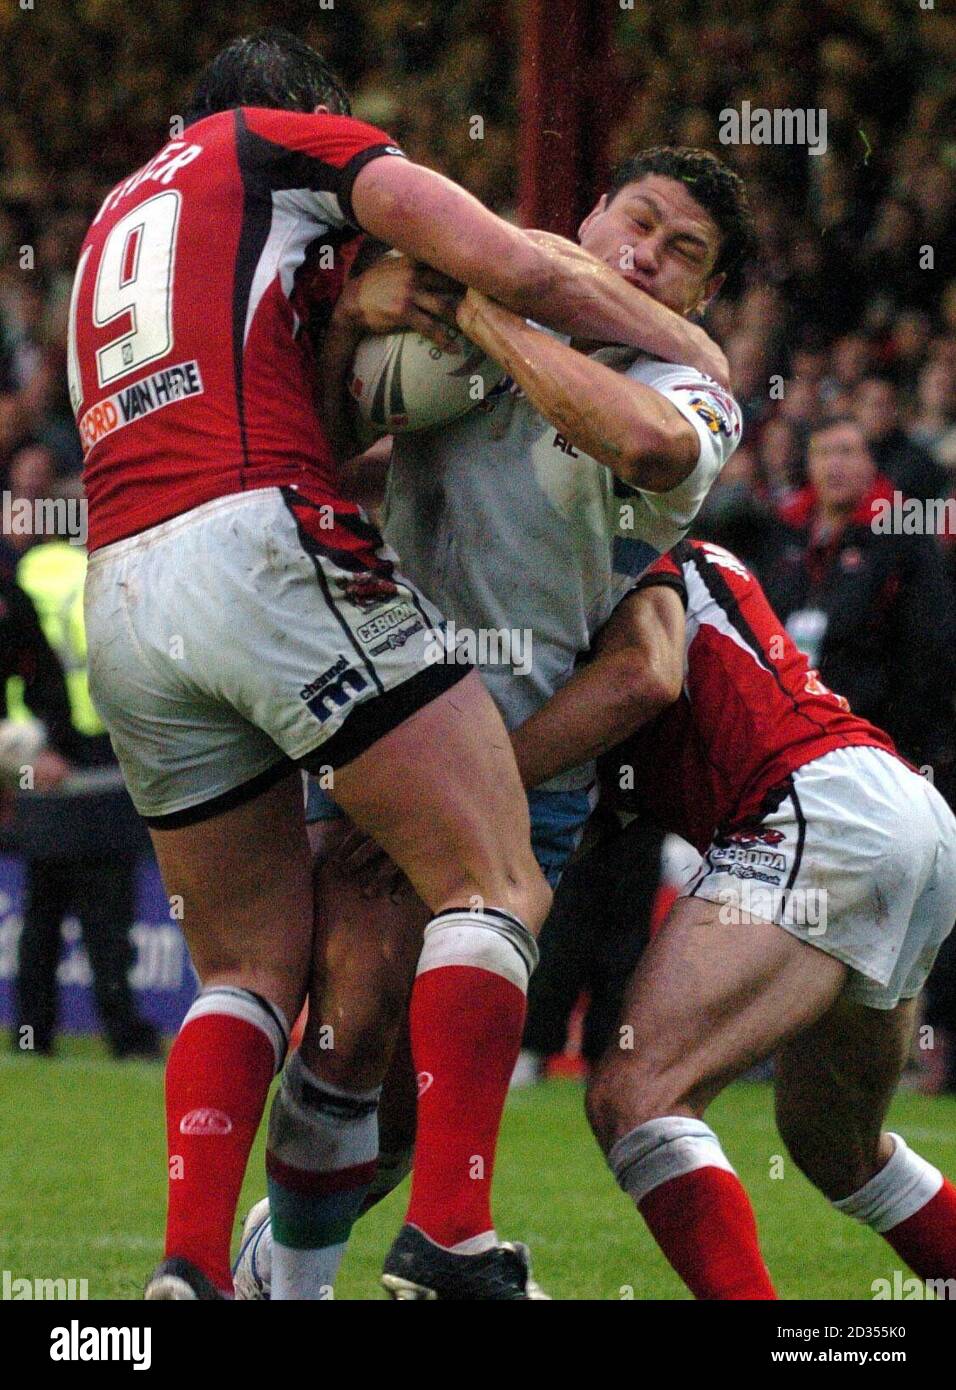 Harlequins' Tyrone Smith is tackled by Salford Reds' Stuart Littler (left) during the engage Super League match at The Willows, Salford. Stock Photo